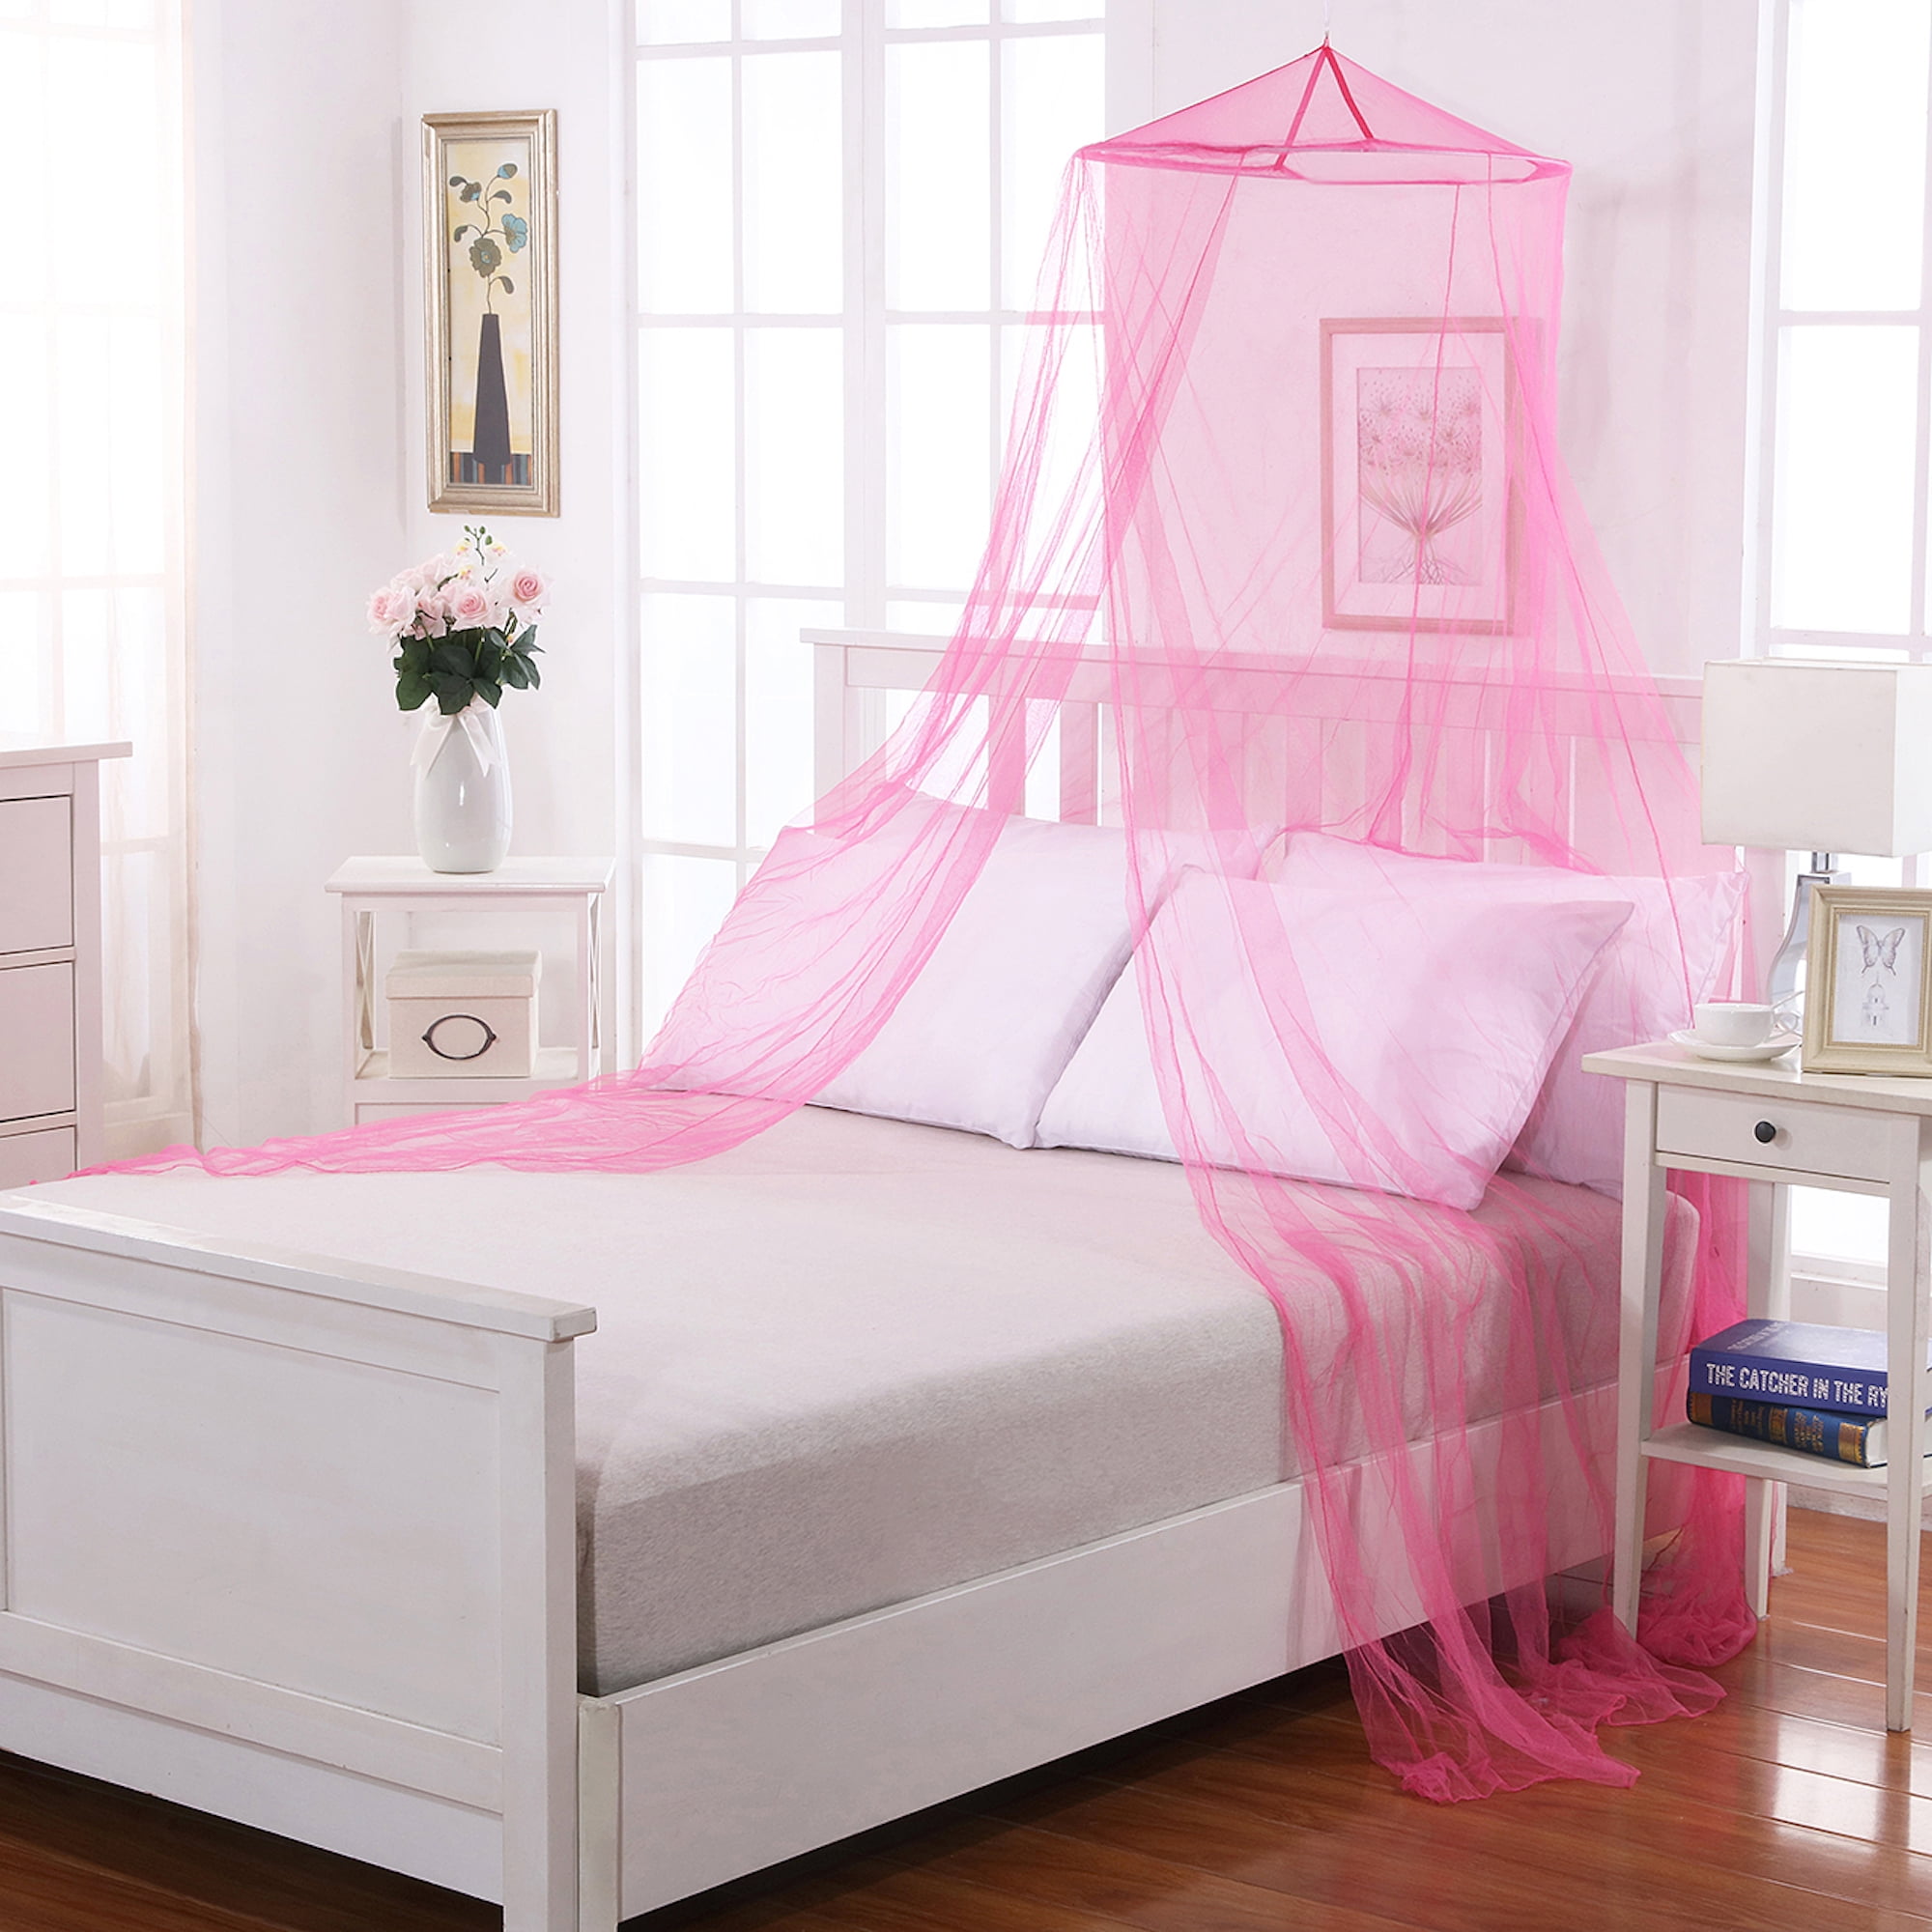 pink bed canopy with lights